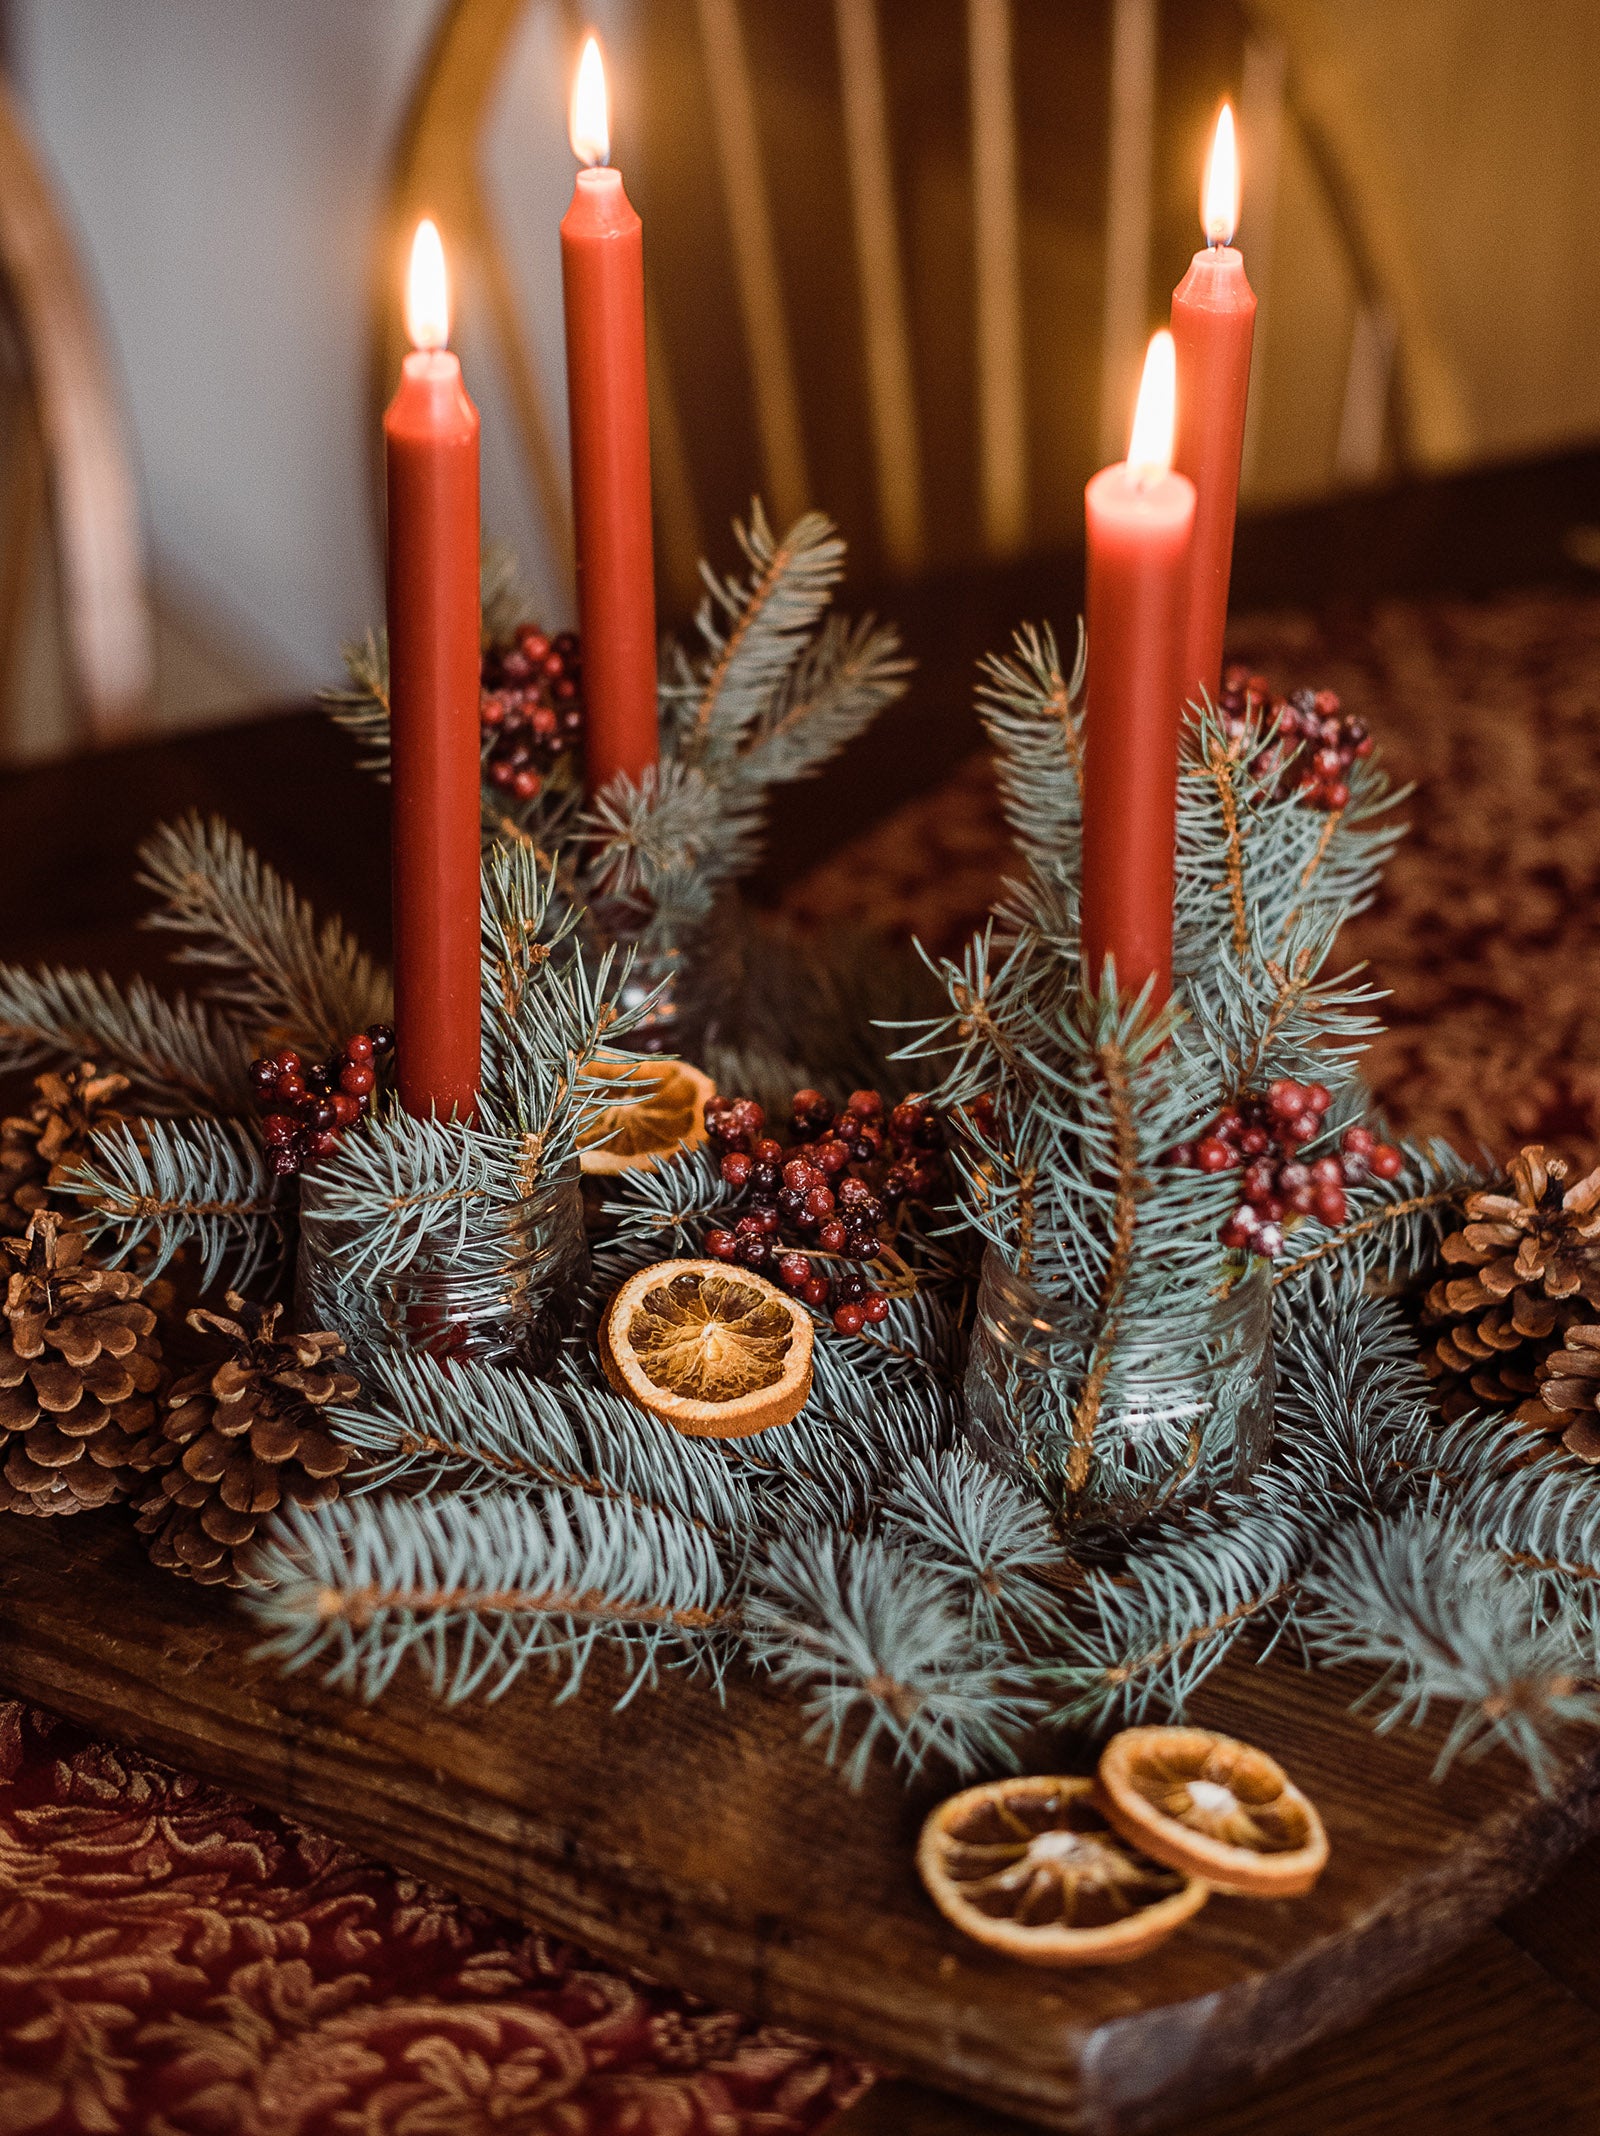 Table centerpiece with pinecones, foliages, berries, dried citrus fruit slices, and candles.